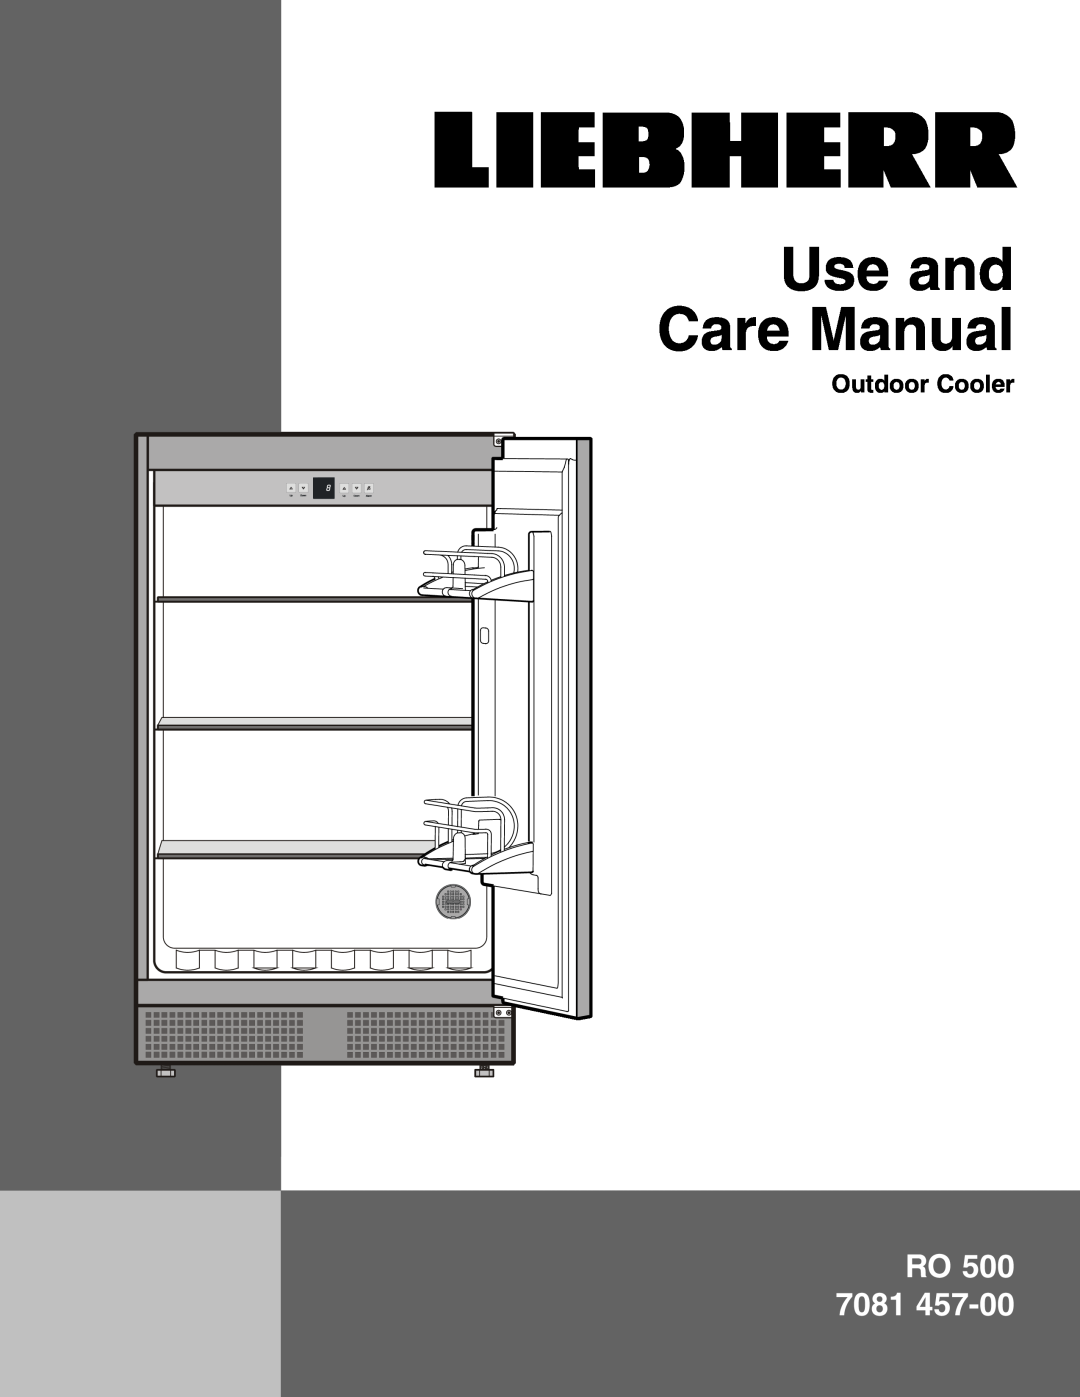 Liebherr RO500 manual Outdoor Cooler, Use and Care Manual, RO 500 7081 